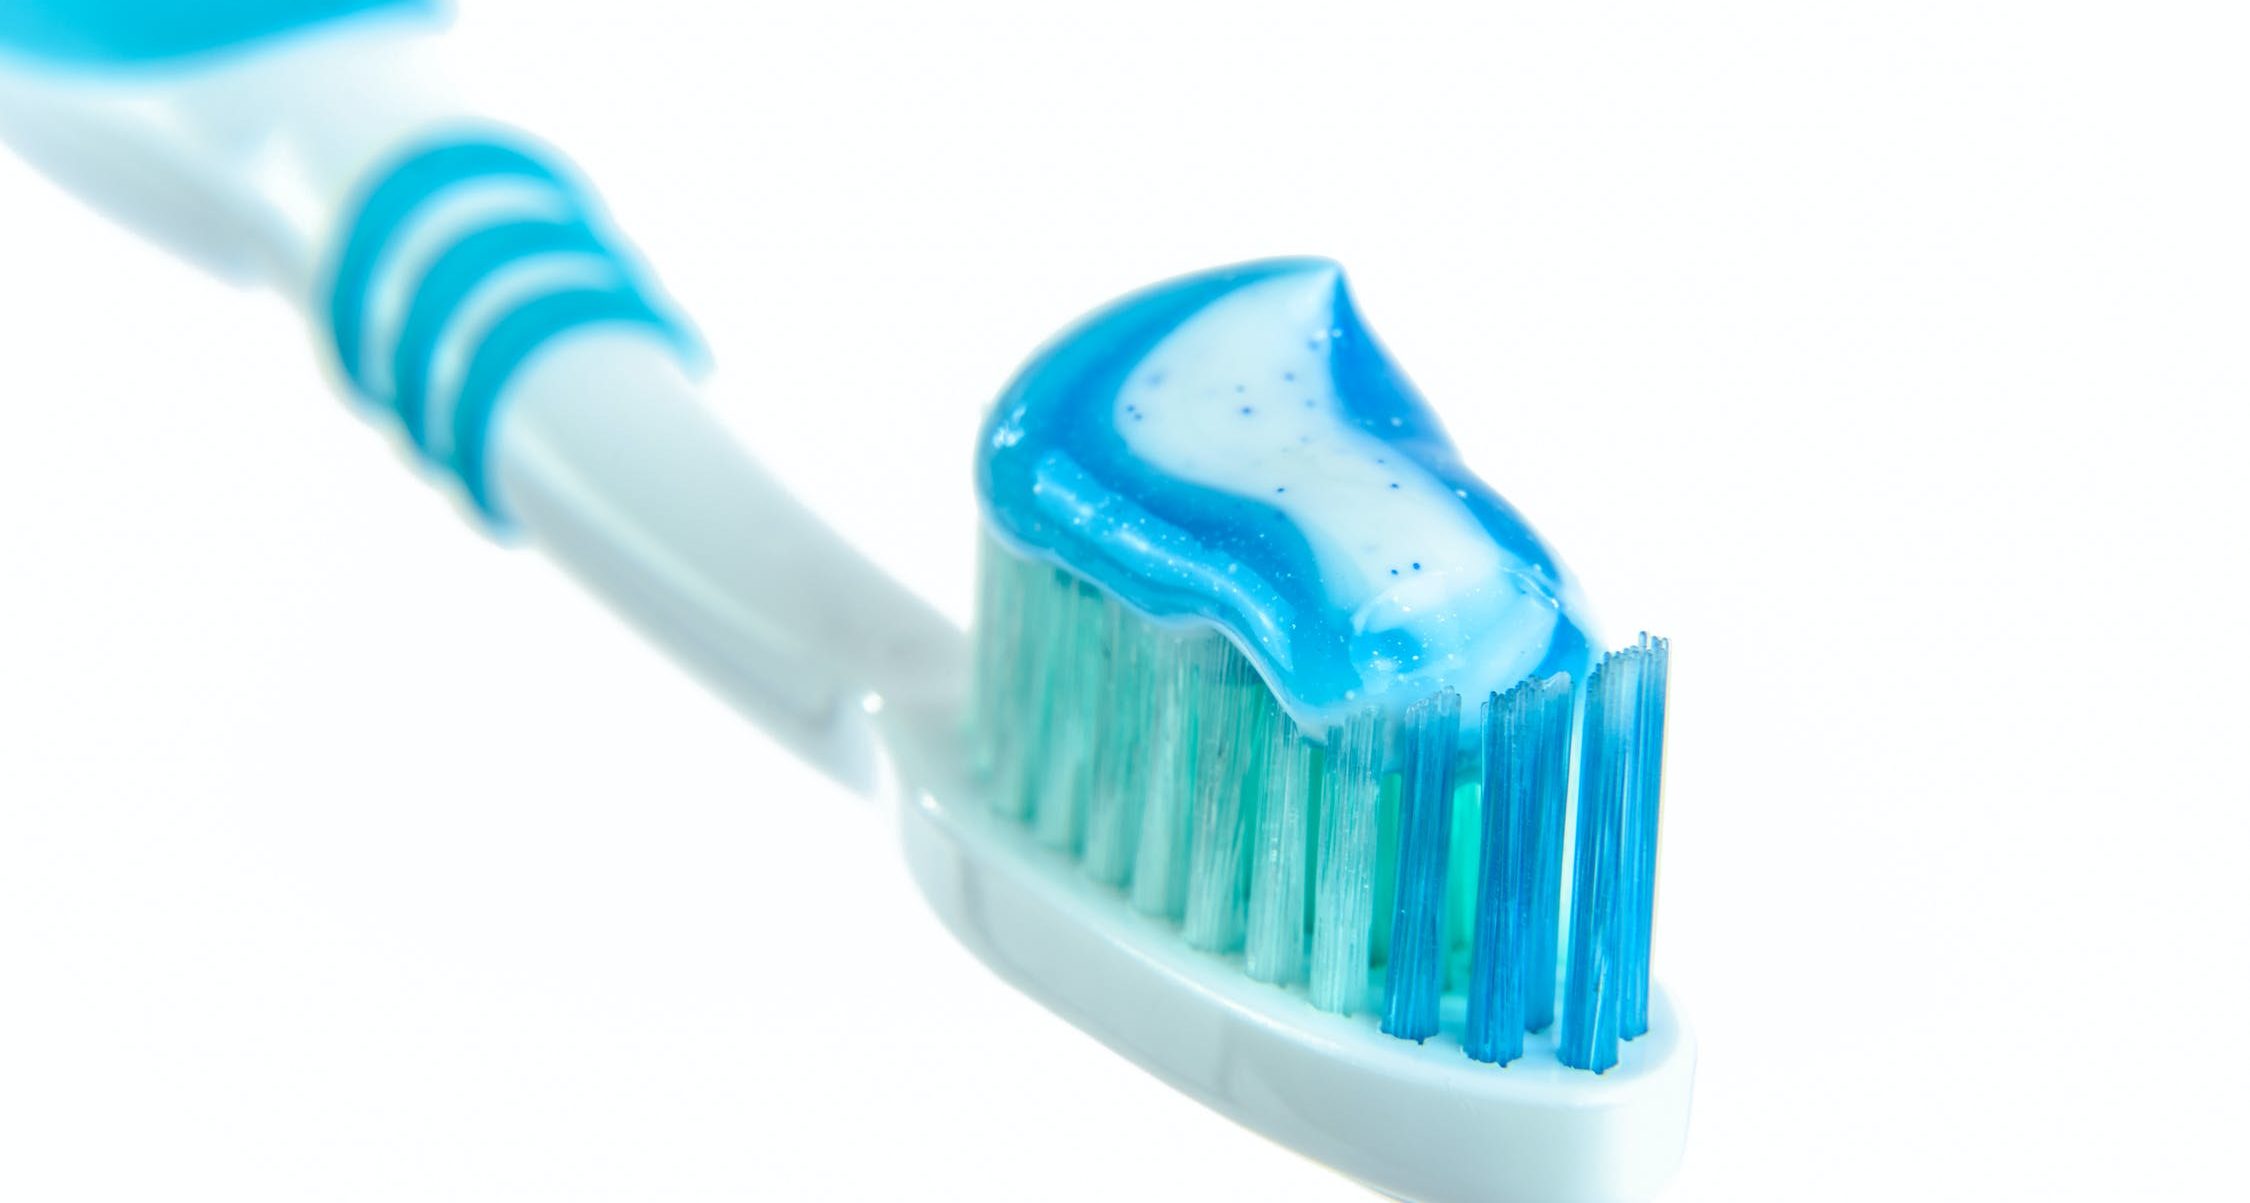 How to brush your teeth - with a manual or electric toothbrush